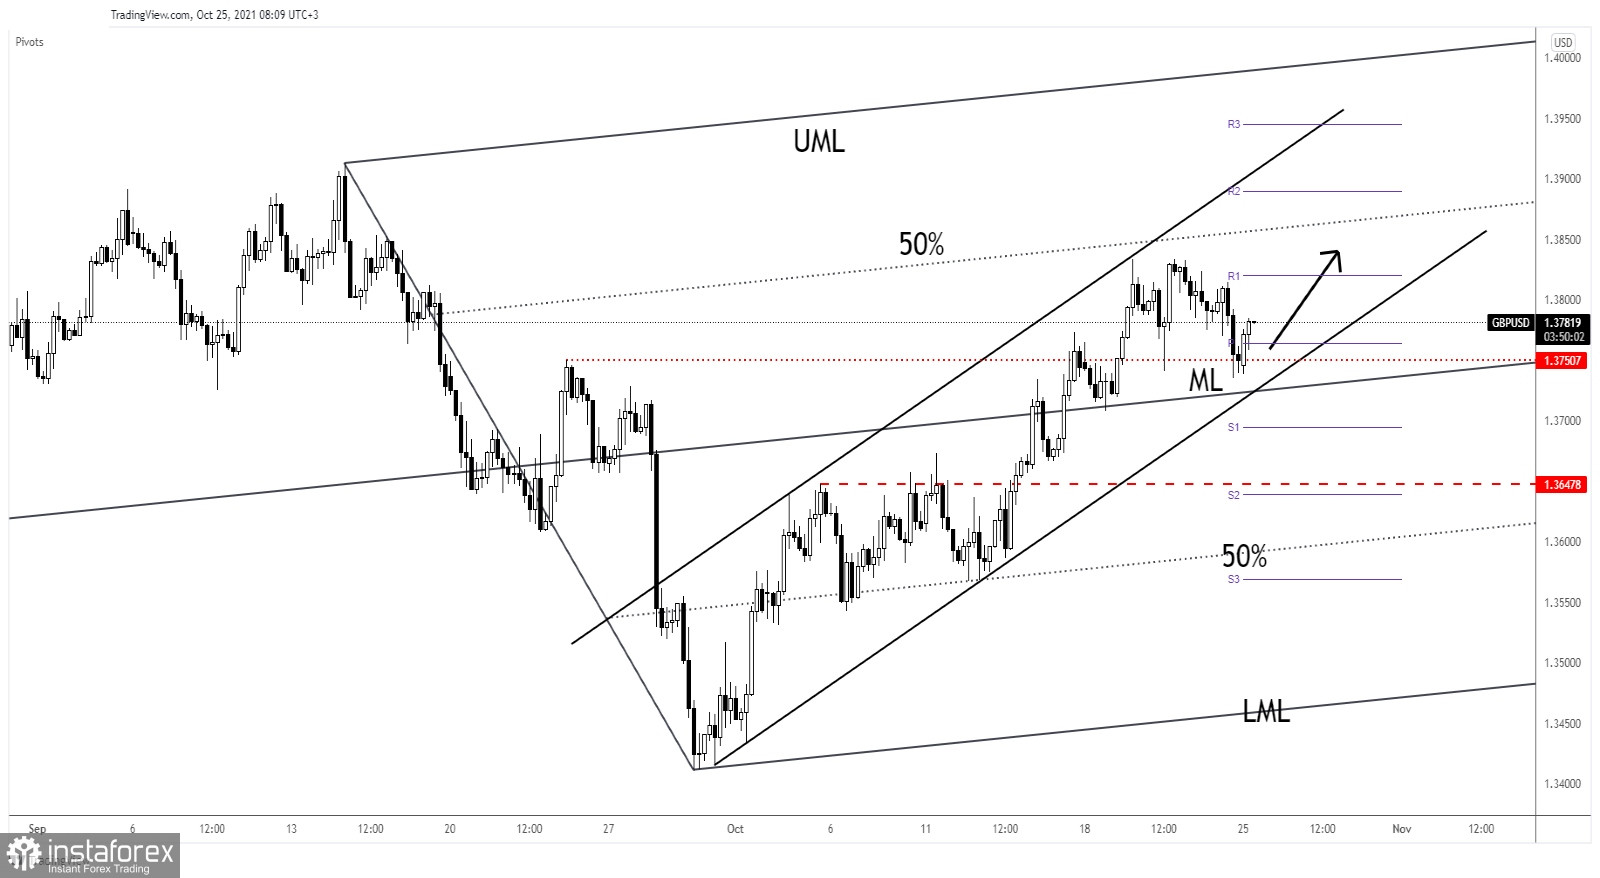 GBP/USD to rise in short term